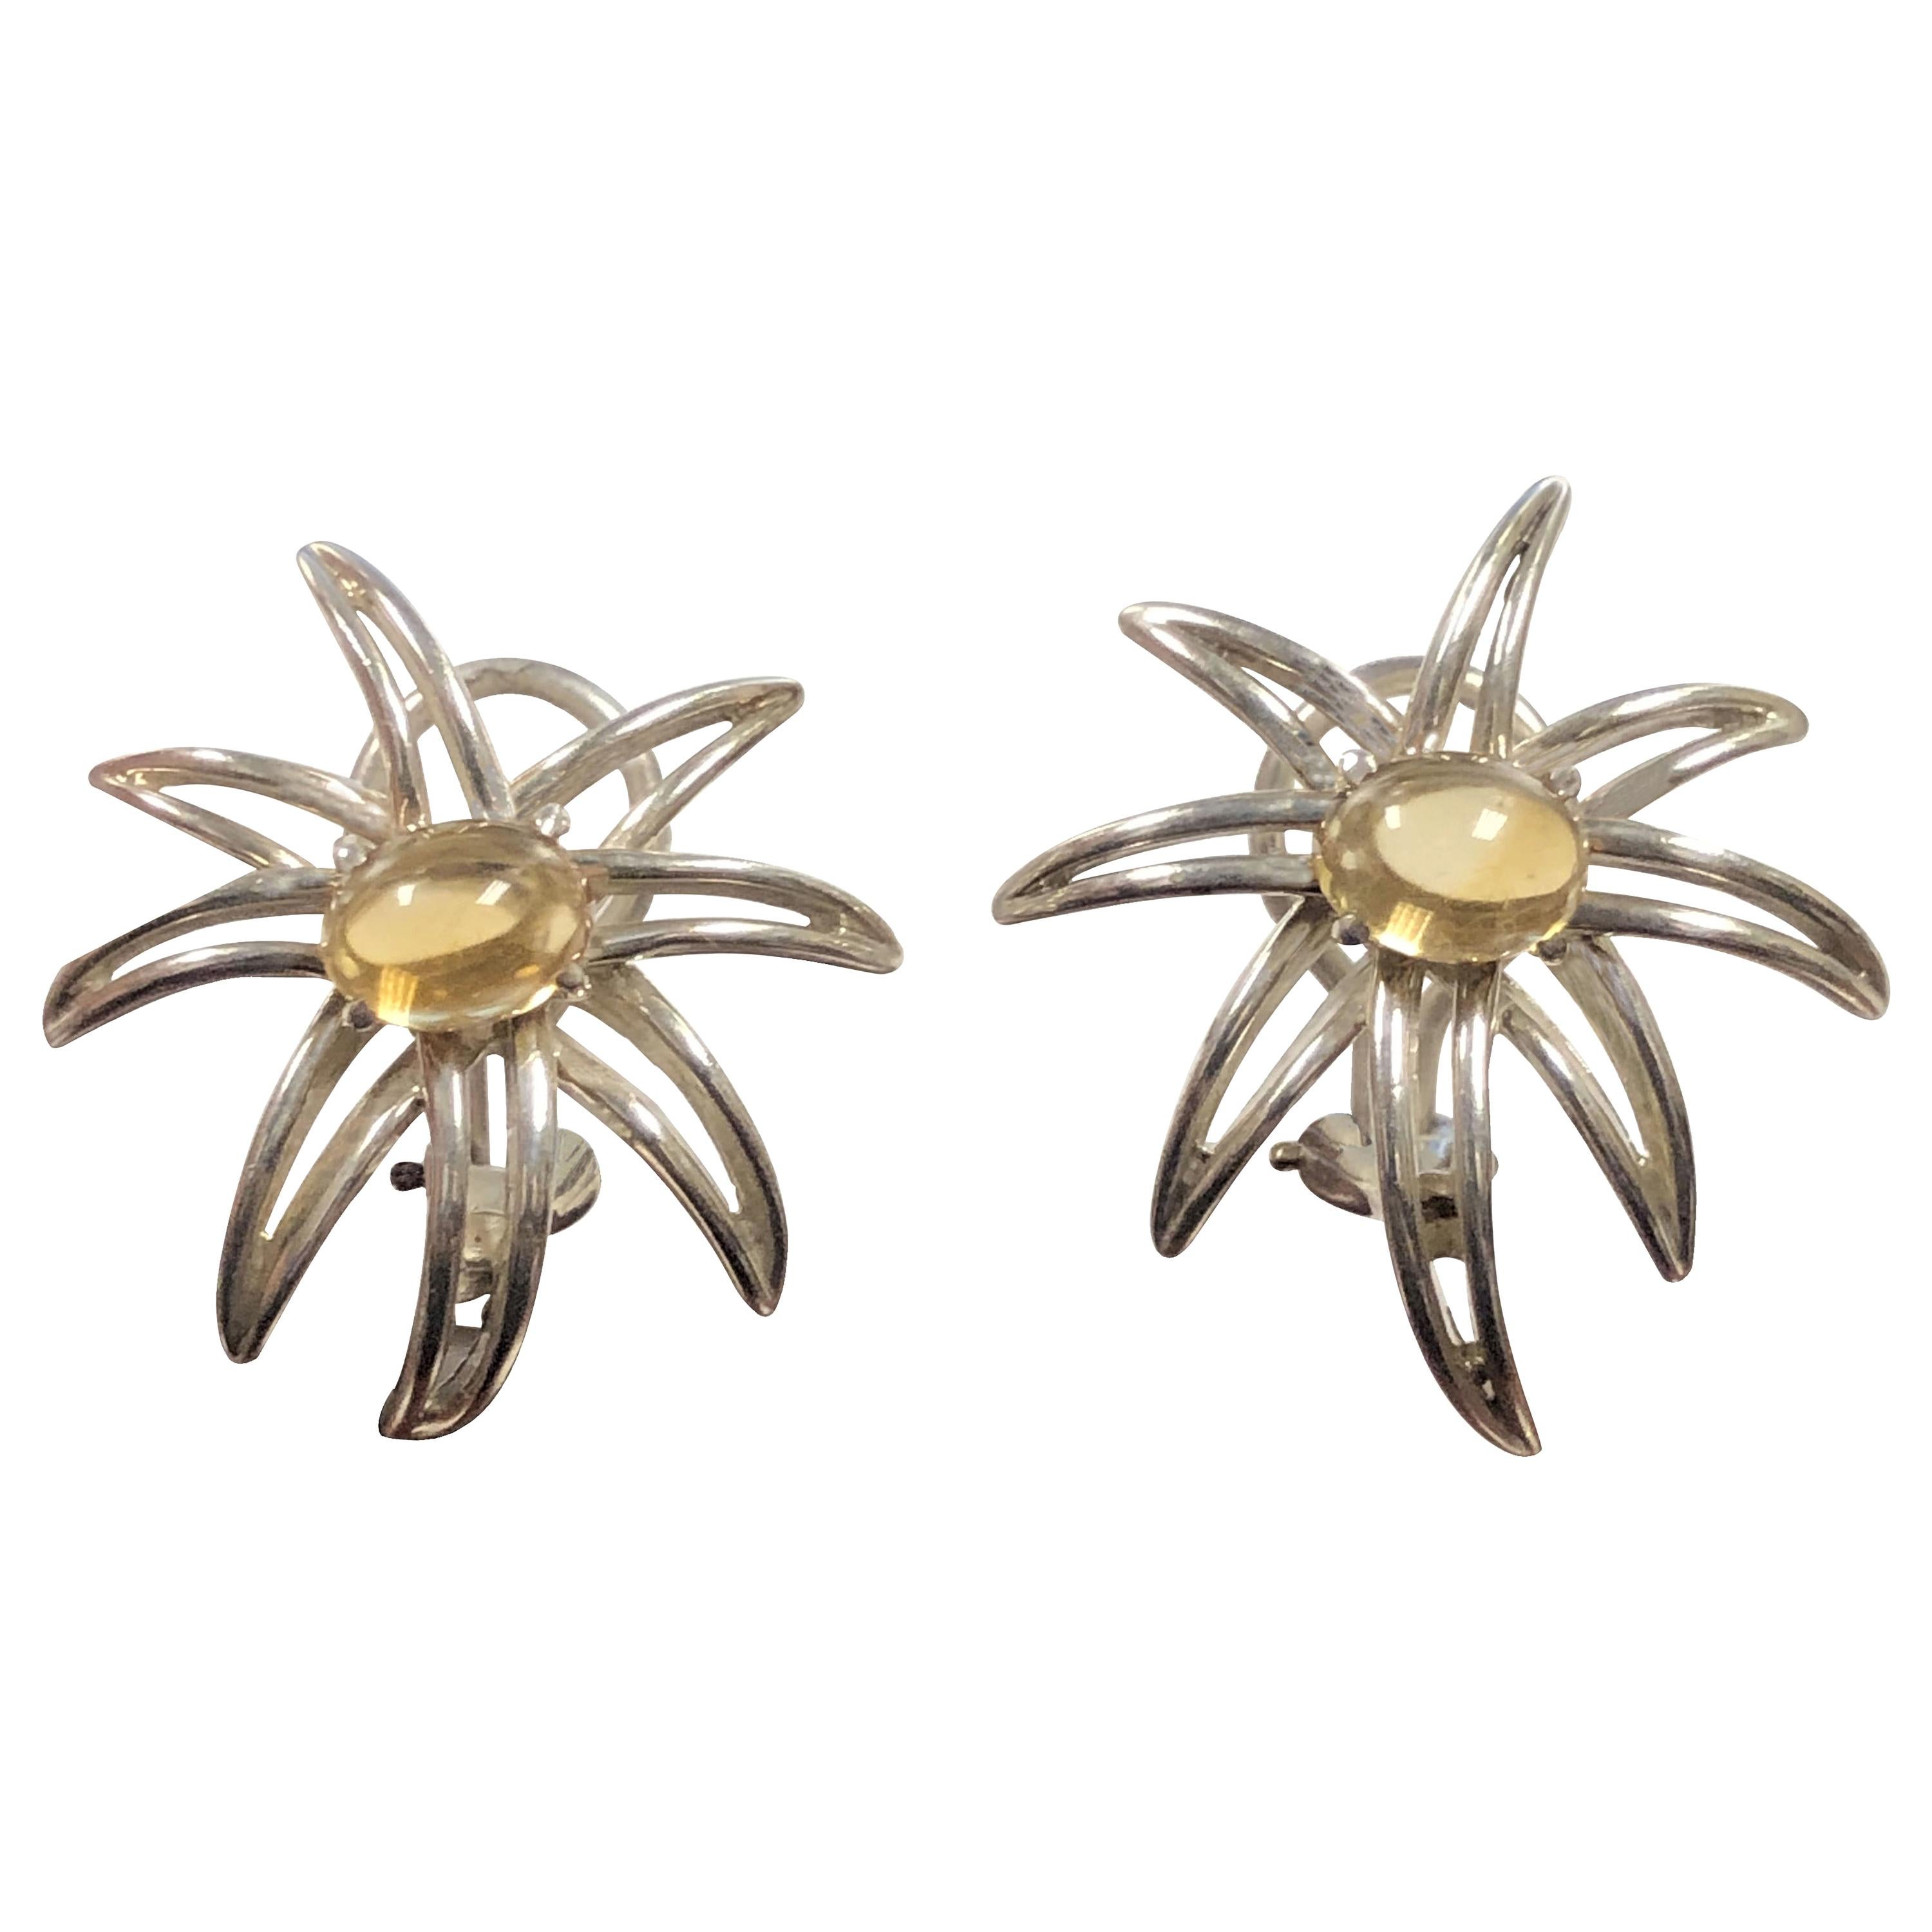 Tiffany & Co. Fireworks Silver and Citrine Earrings